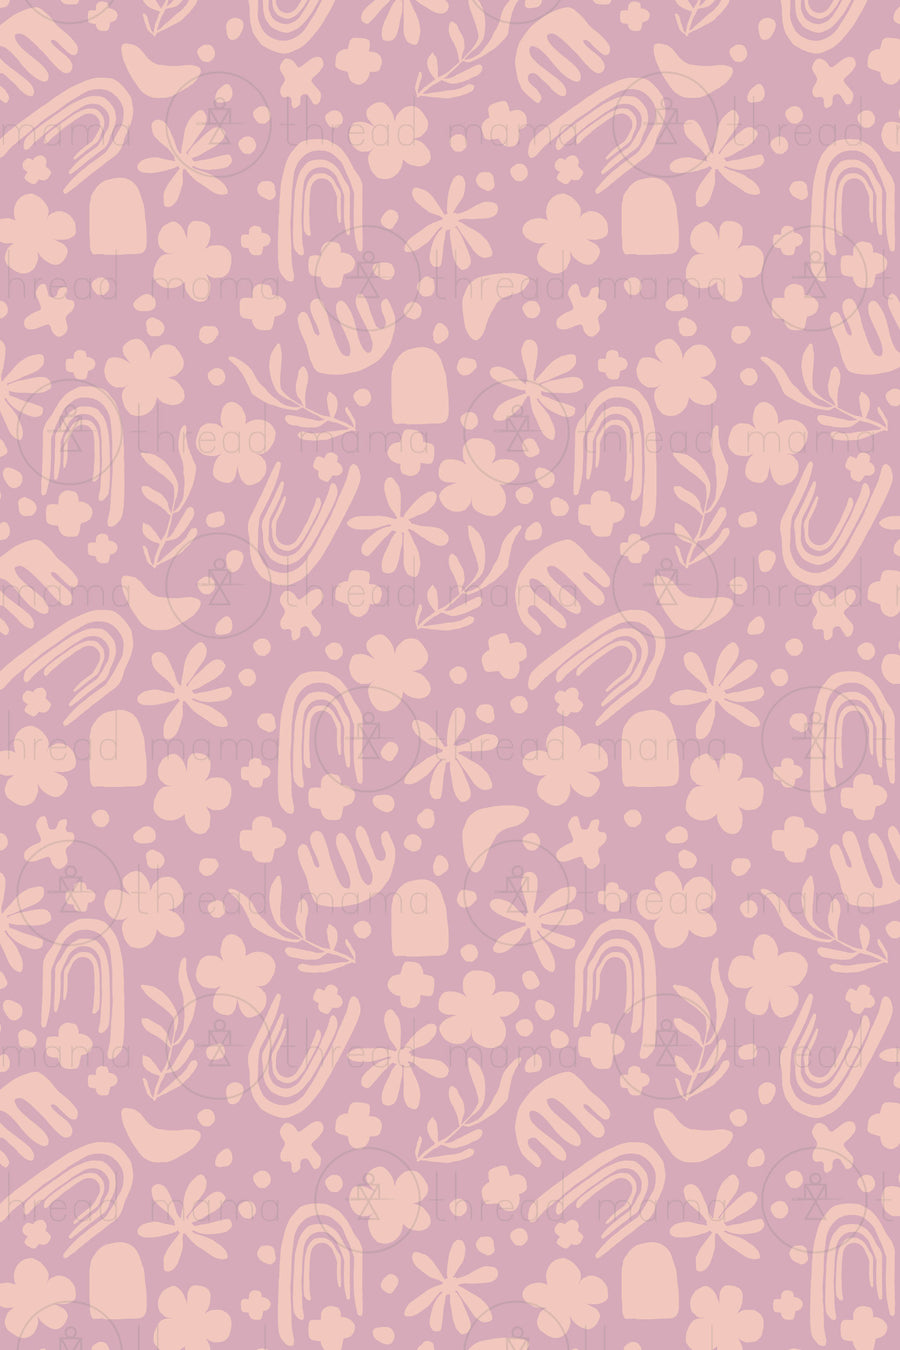 Repeating Pattern 189 (Seamless)